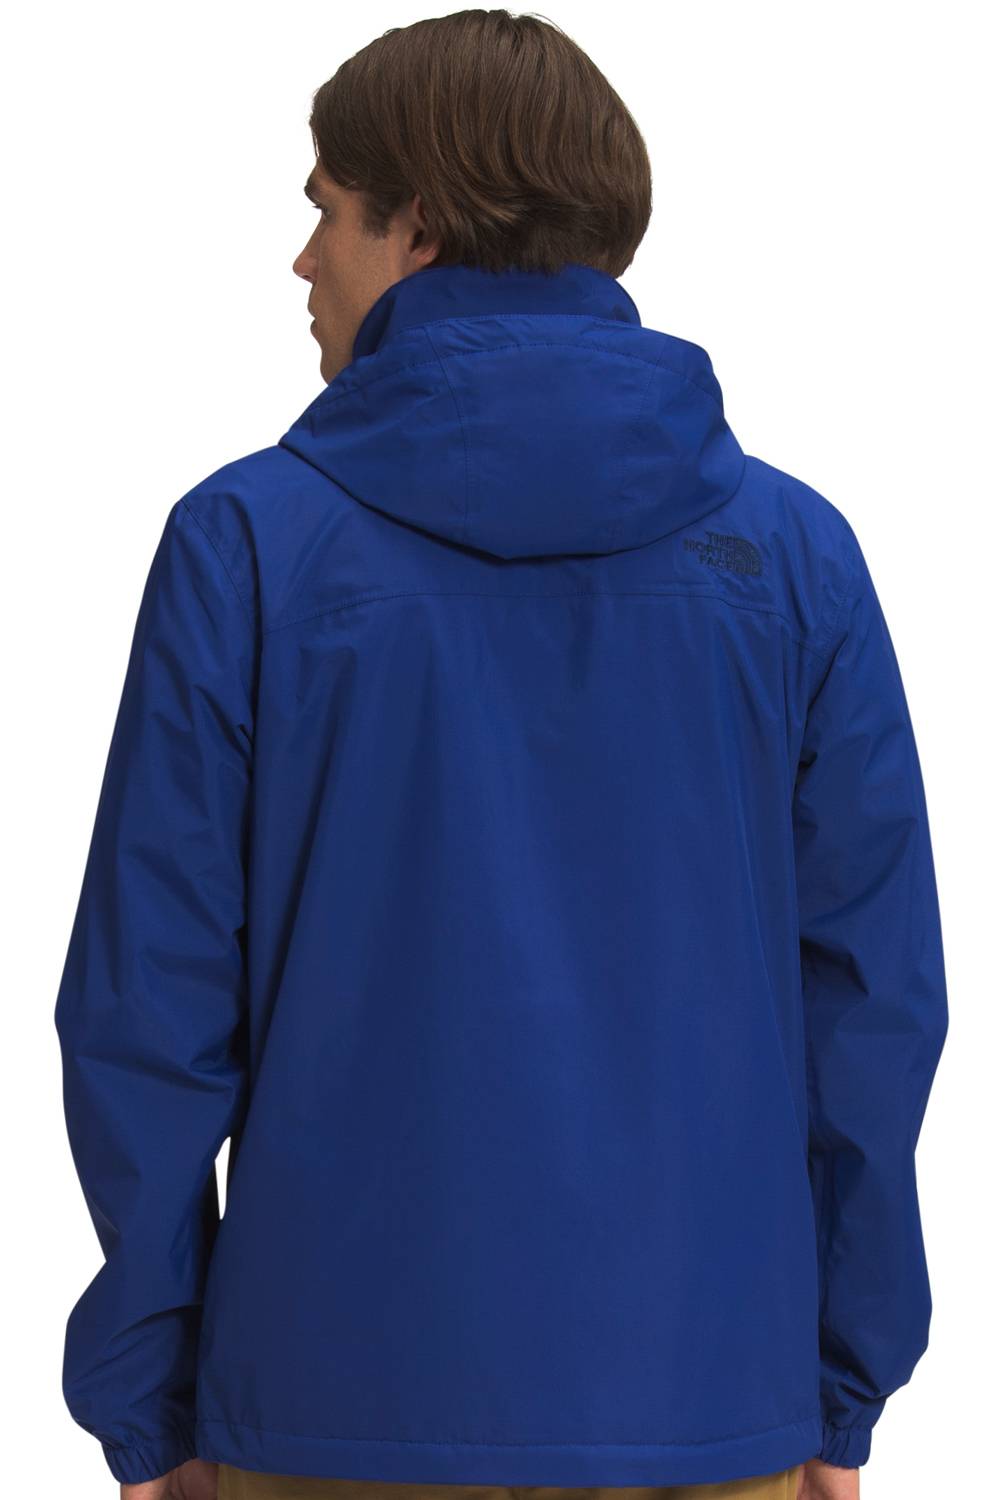 THE NORTH FACE - Chaqueta Impermeable Resolve 2 Hombre